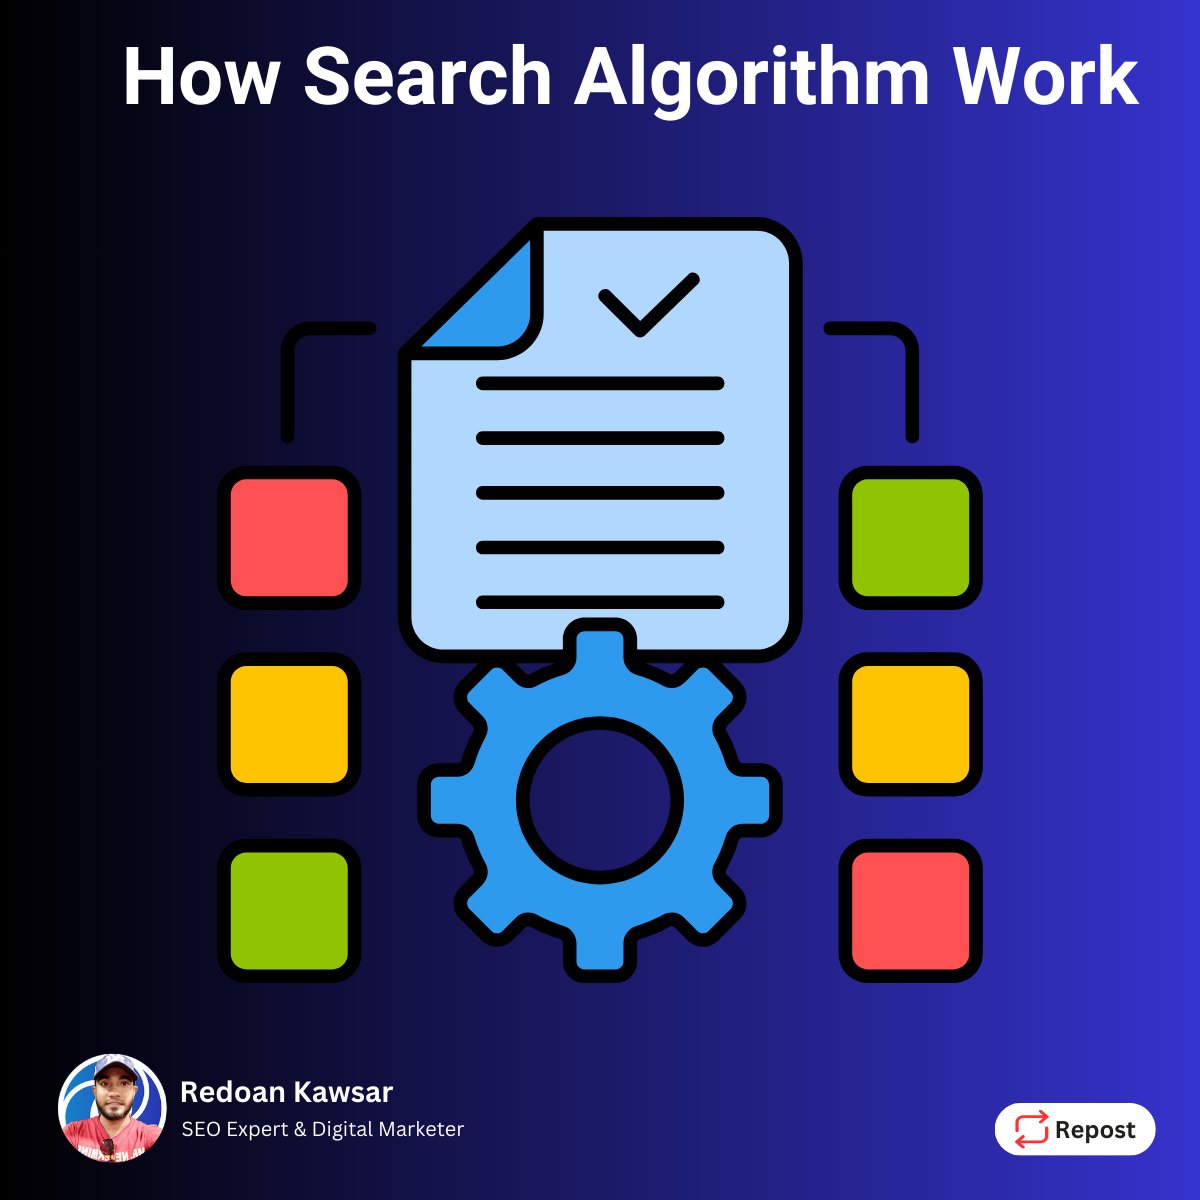 🔍 Search Algorithm Breakdown:

- Scans & ranks pages by relevance & authority 📊
- Leverages AI for user intent & context understanding 🧠
- Regular updates to fight spam & promote quality 🛡️

Tip: Optimize with top-notch content, UX & backlinks 🔗
#SearchAlgorithm #SEOStrategy